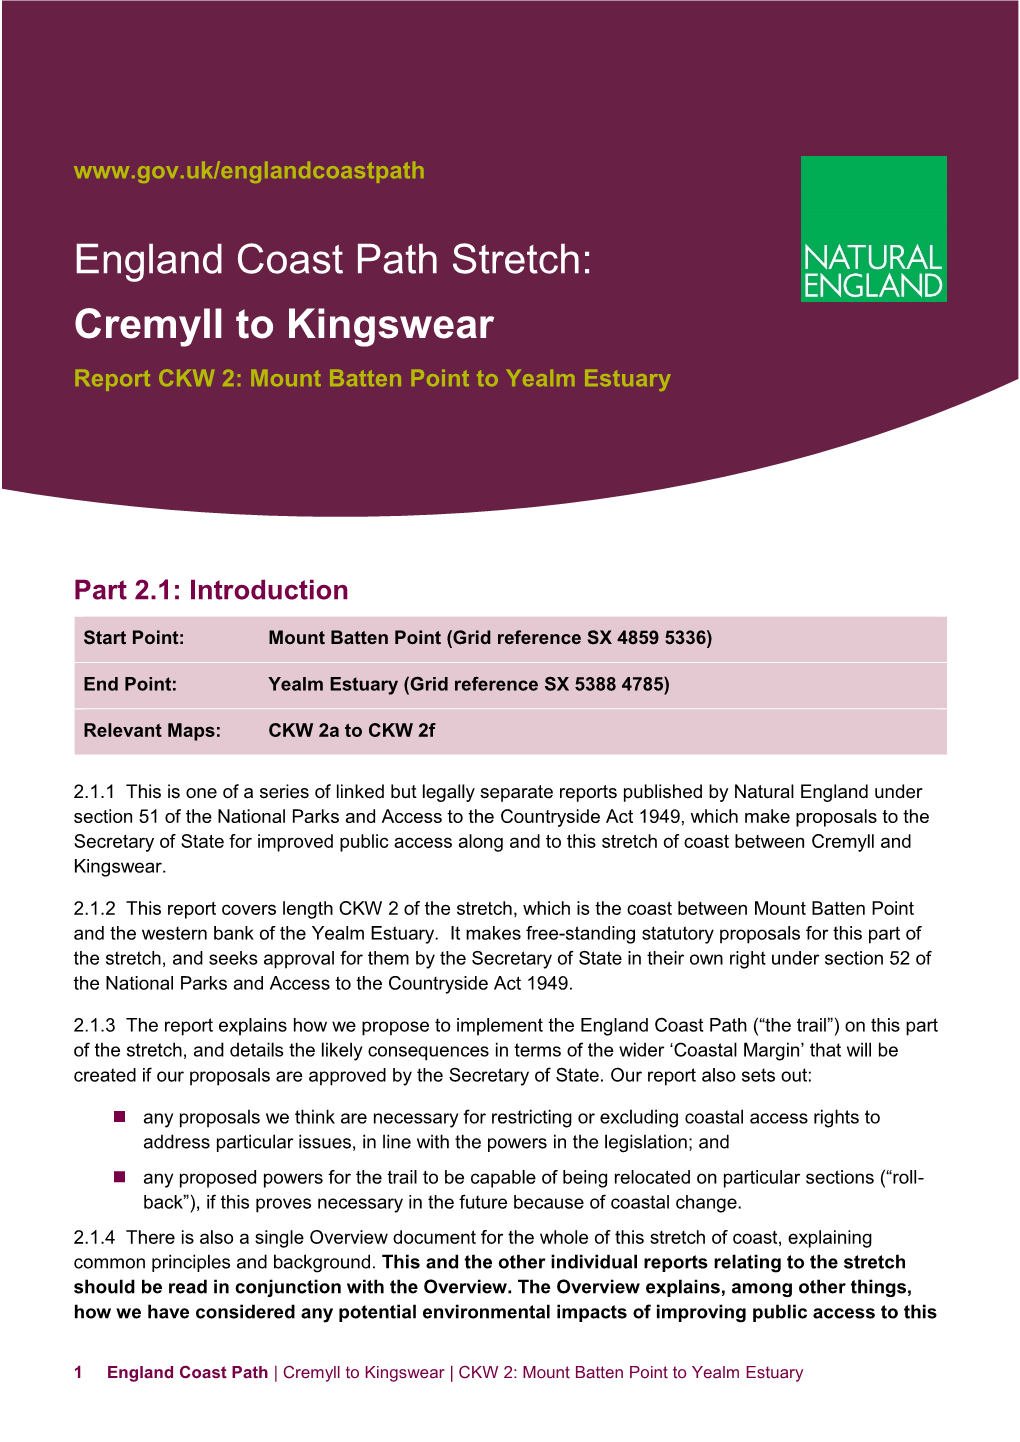 Report CKW 2: Mount Batten Point to Yealm Estuary